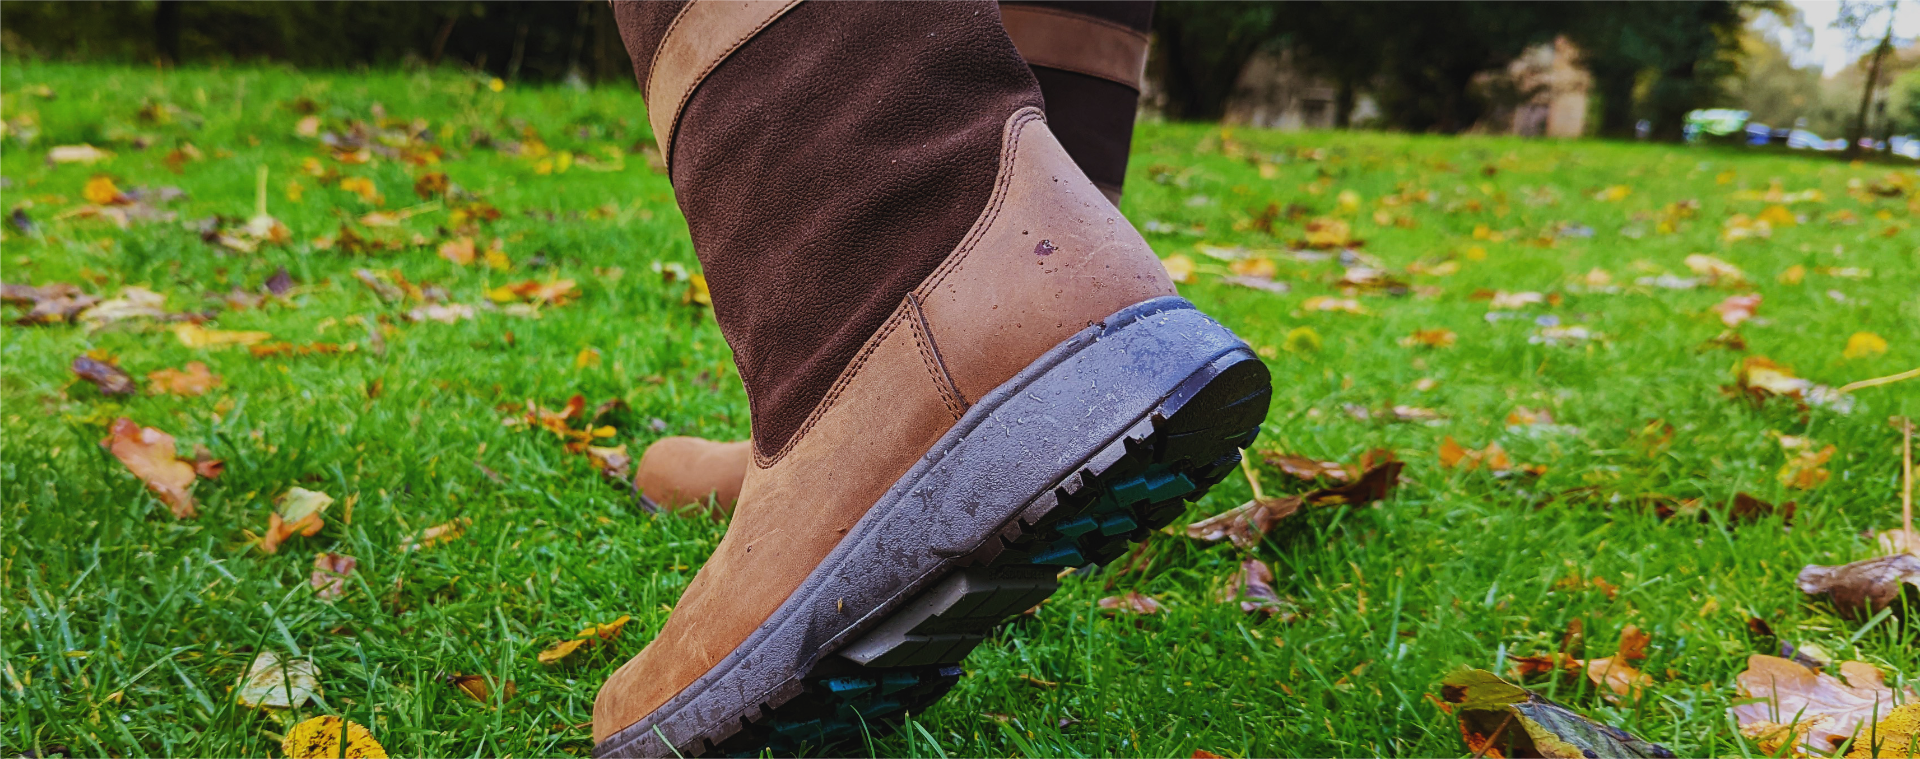 A close-up of a pair of comfortable, supportive outdoor walking boots, ideal for improving posture and reducing knee pain, as recommended by shoefit.uk.